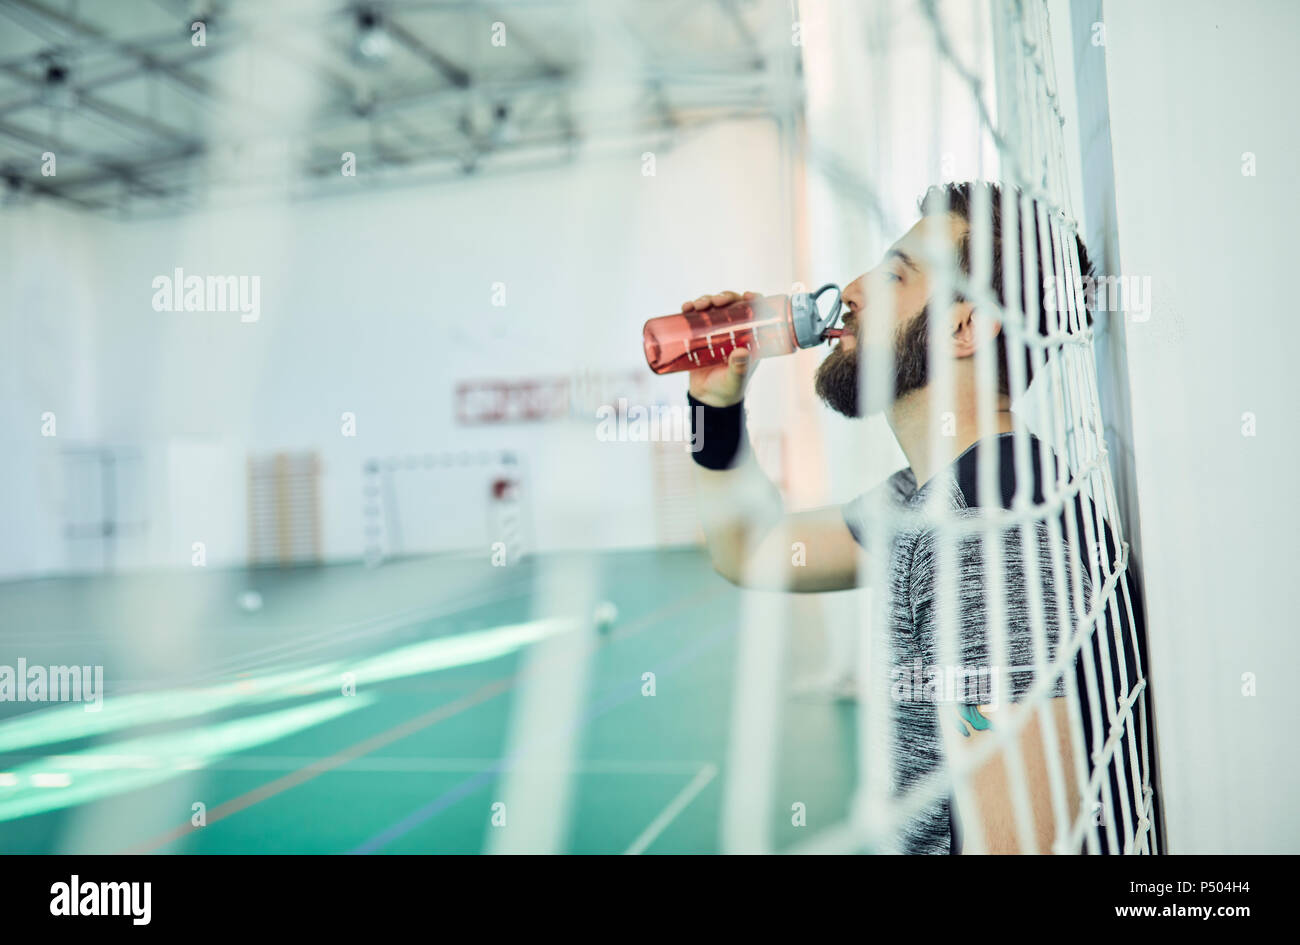 Basketball player drinking from plastic bottle Stock Photo